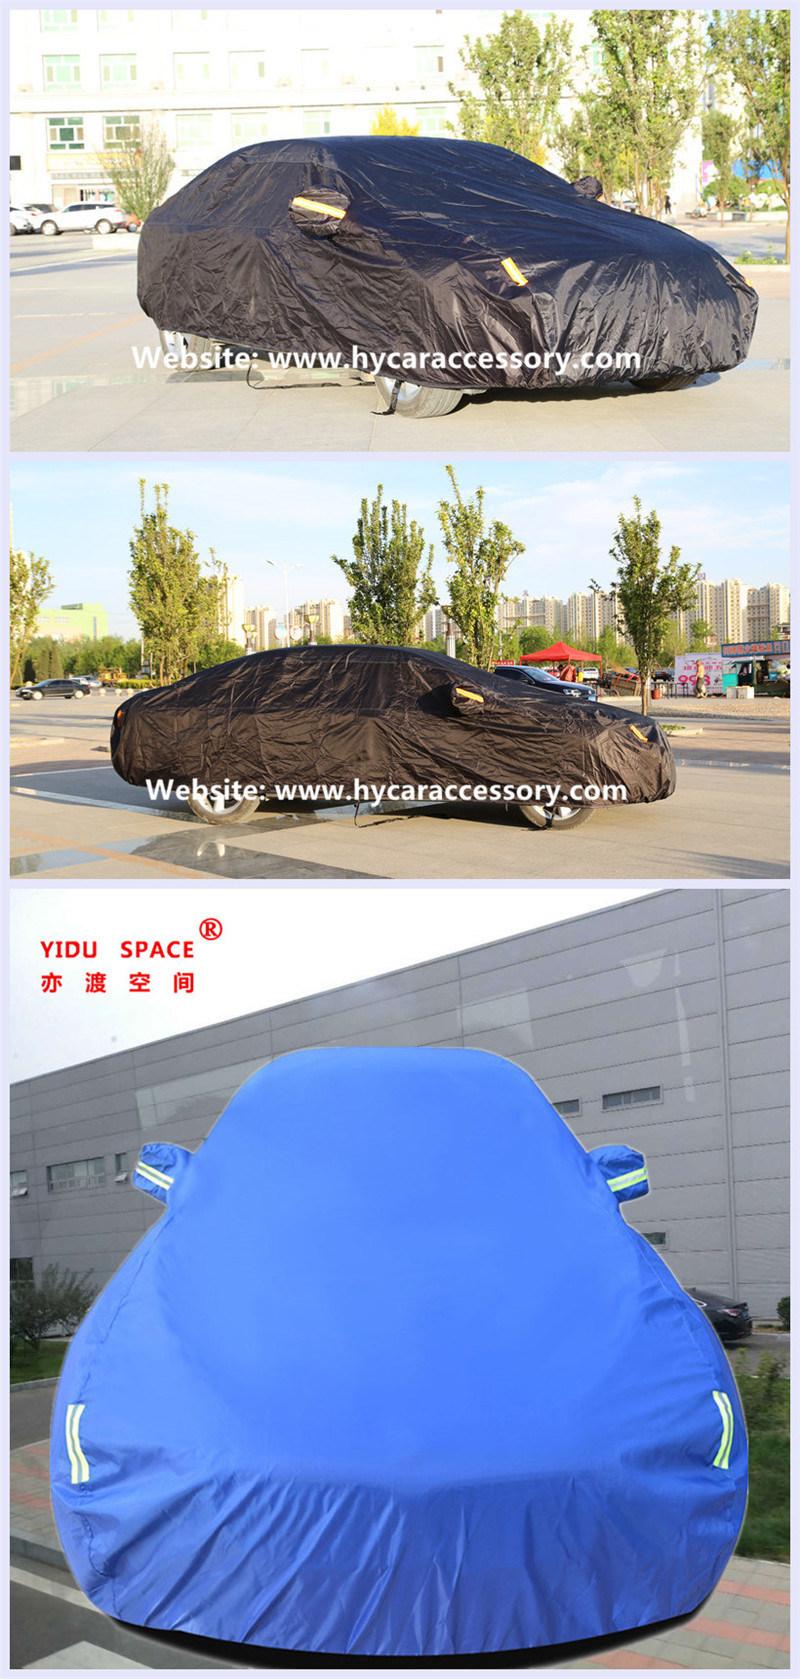 Wholesale Universal Portable Sunproof Waterproof Folding Oxford Camouflage Car Cover